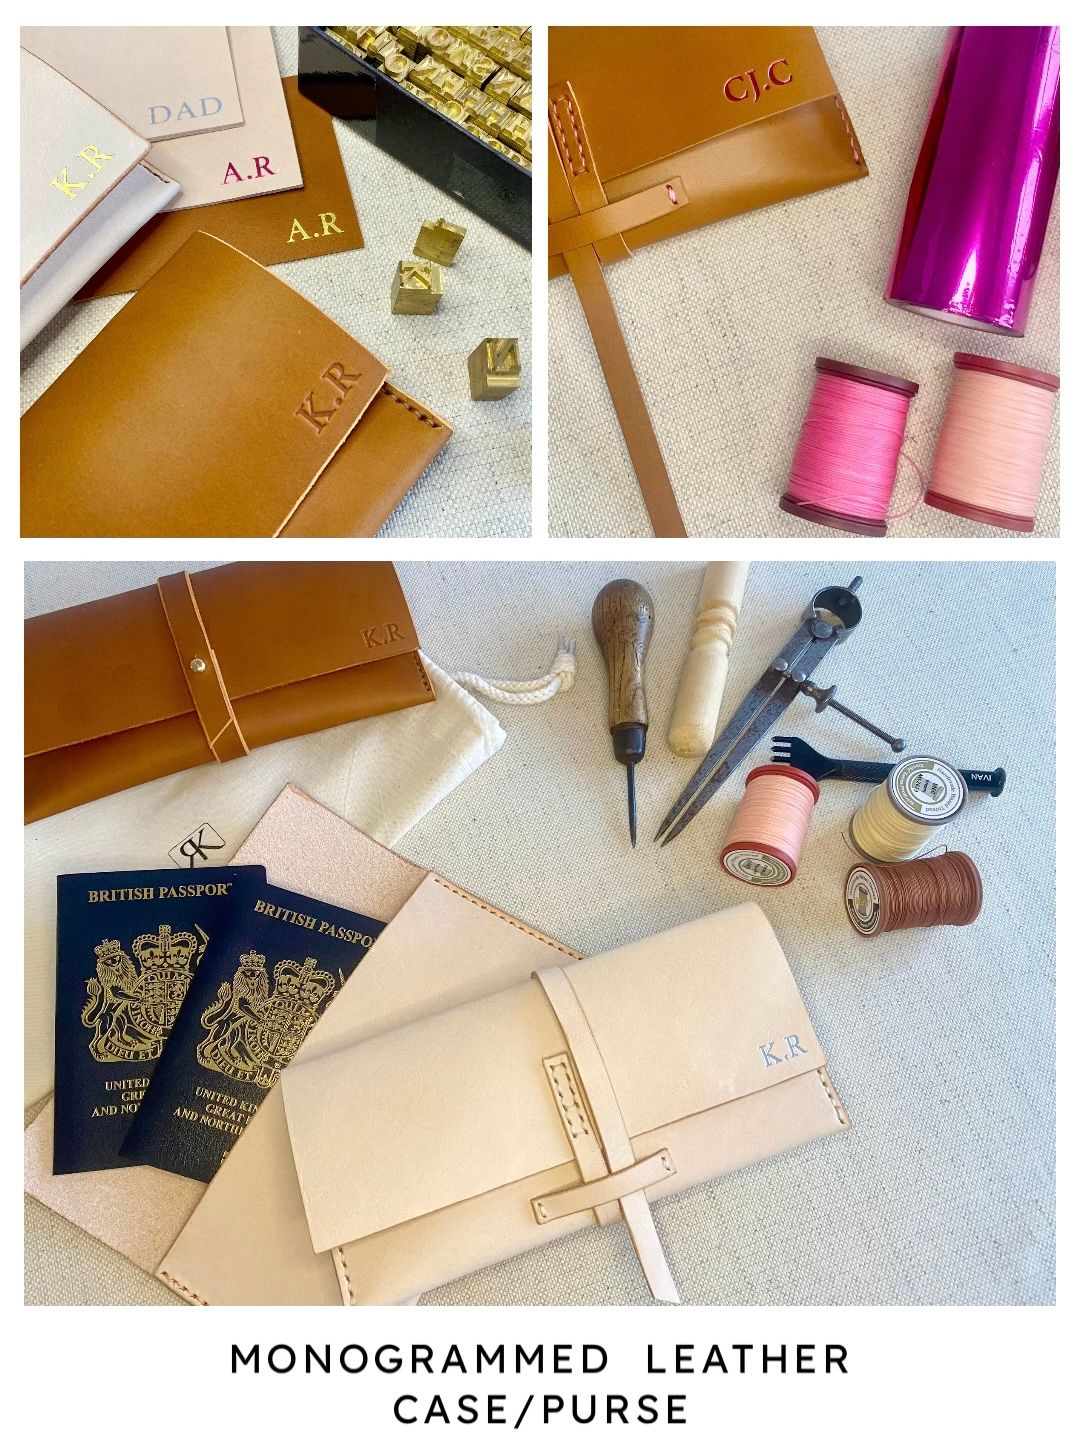 MONOGRAMMED LEATHER PURSE WORKSHOP WITH KATIE ROE 29 JUNE